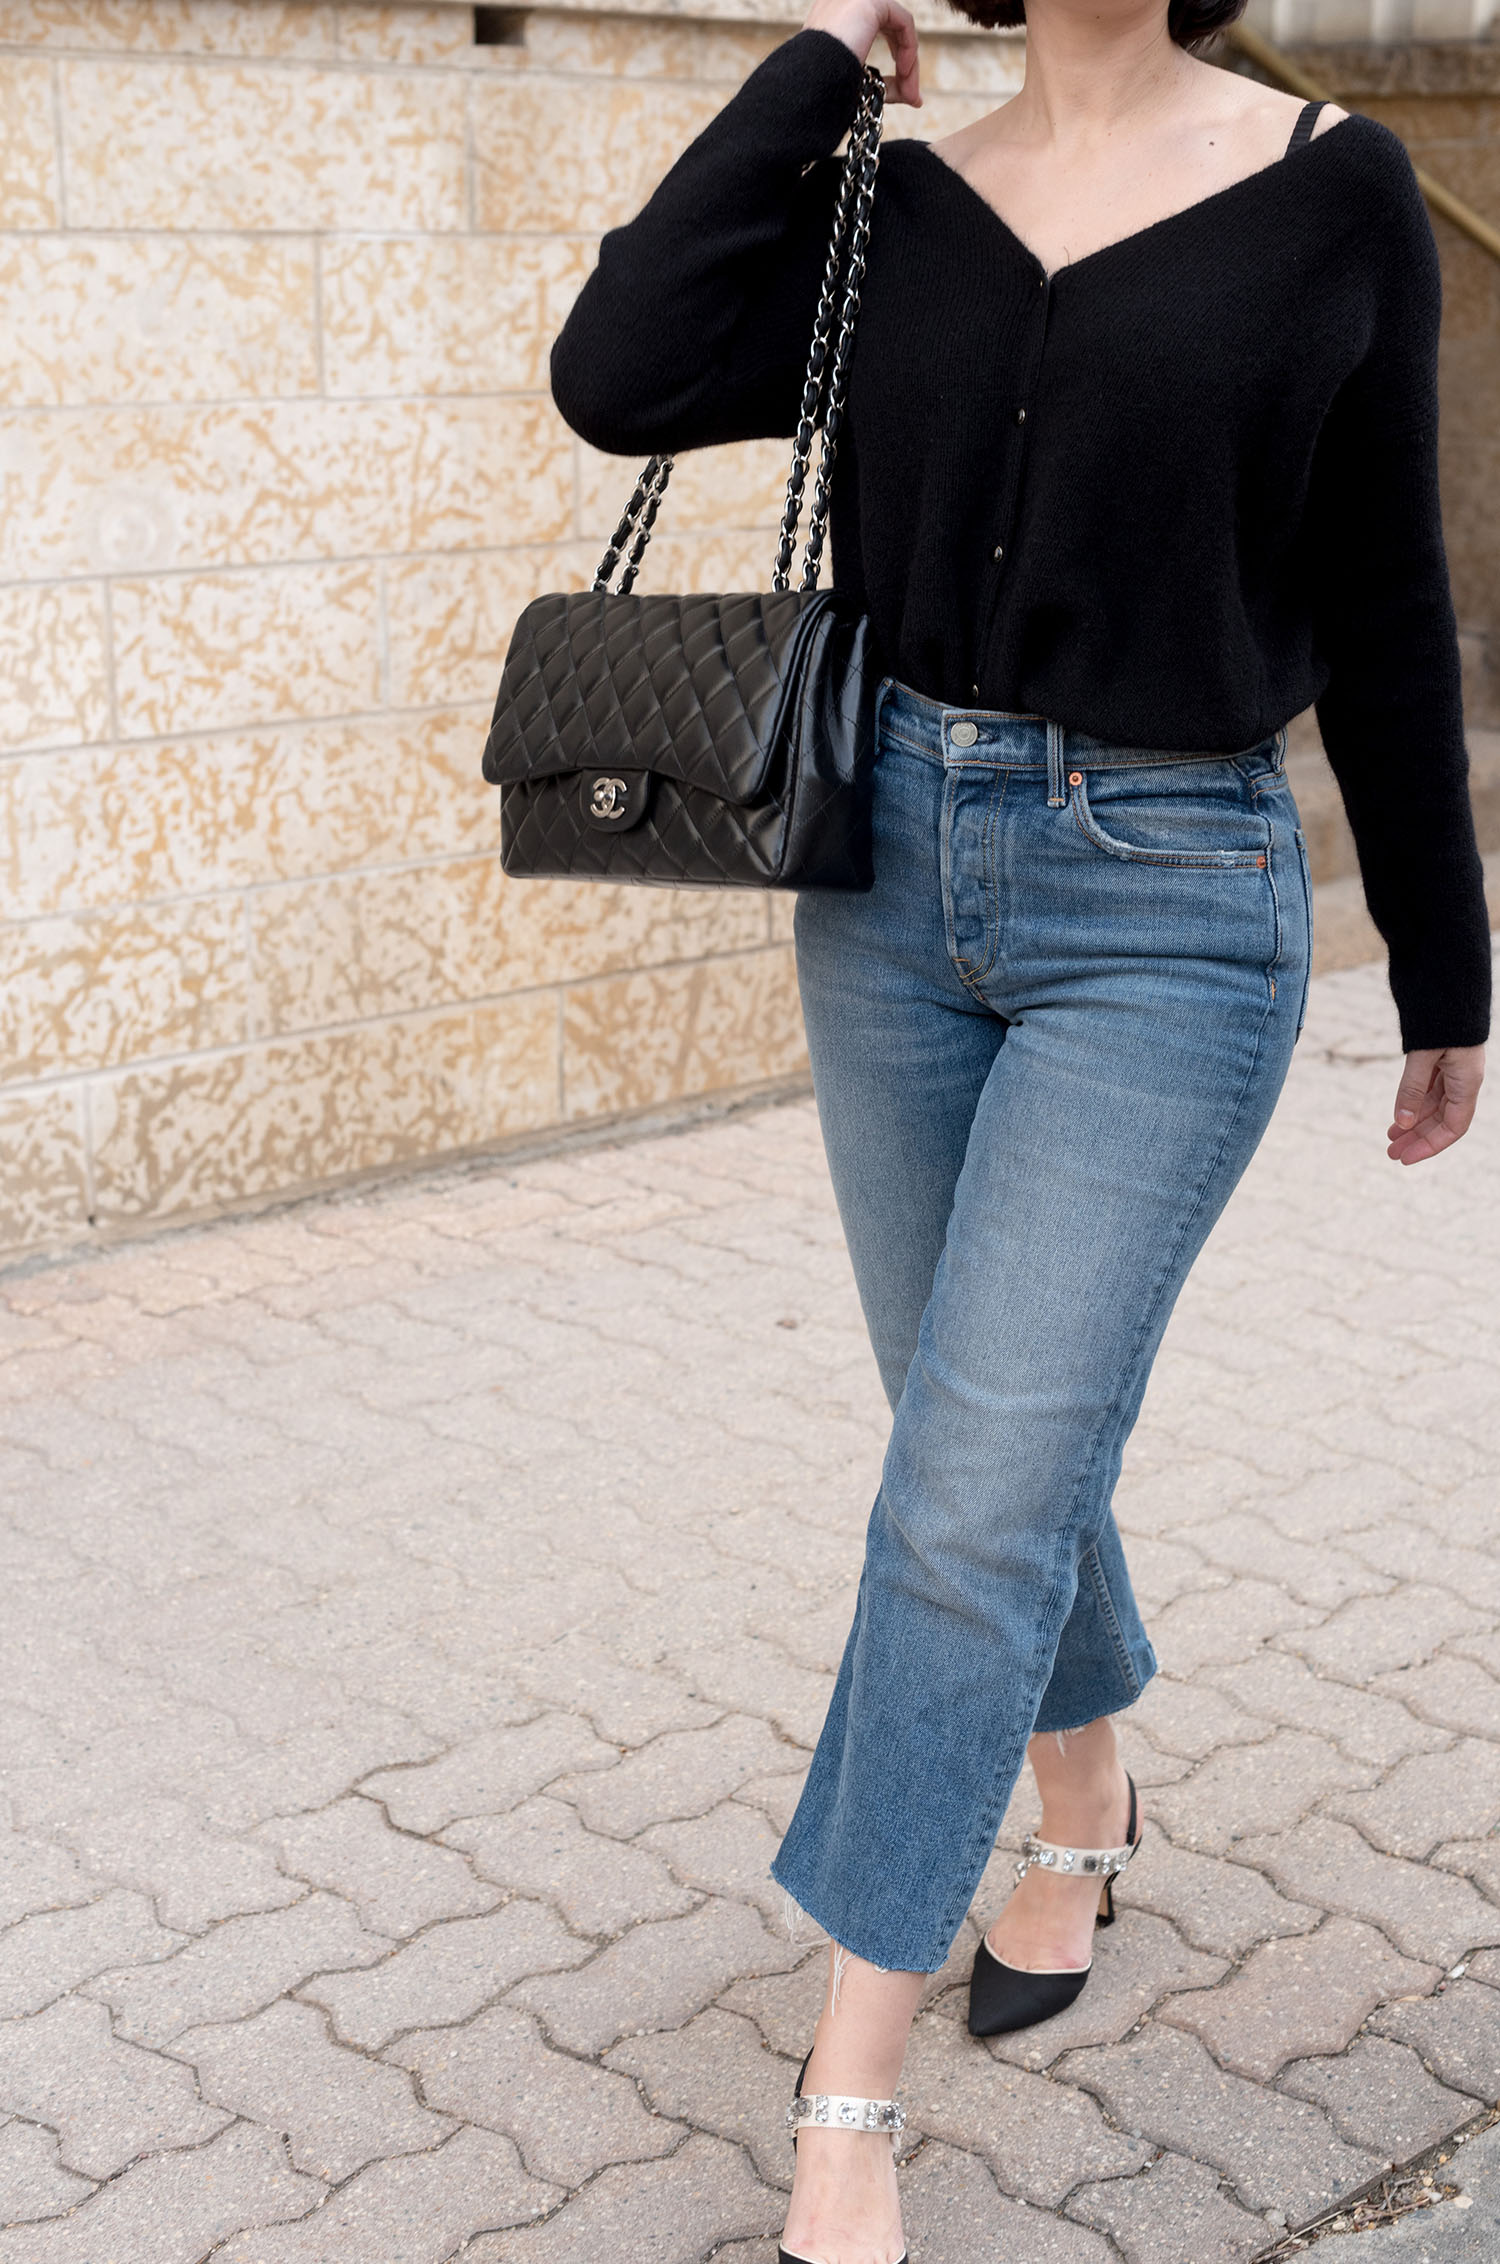 Outfit details on top Canadian fashion blogger Cee Fardoe of Coco & Vera, including a Chanel jumbo quilted handbag and Grfrnd Helena jeans